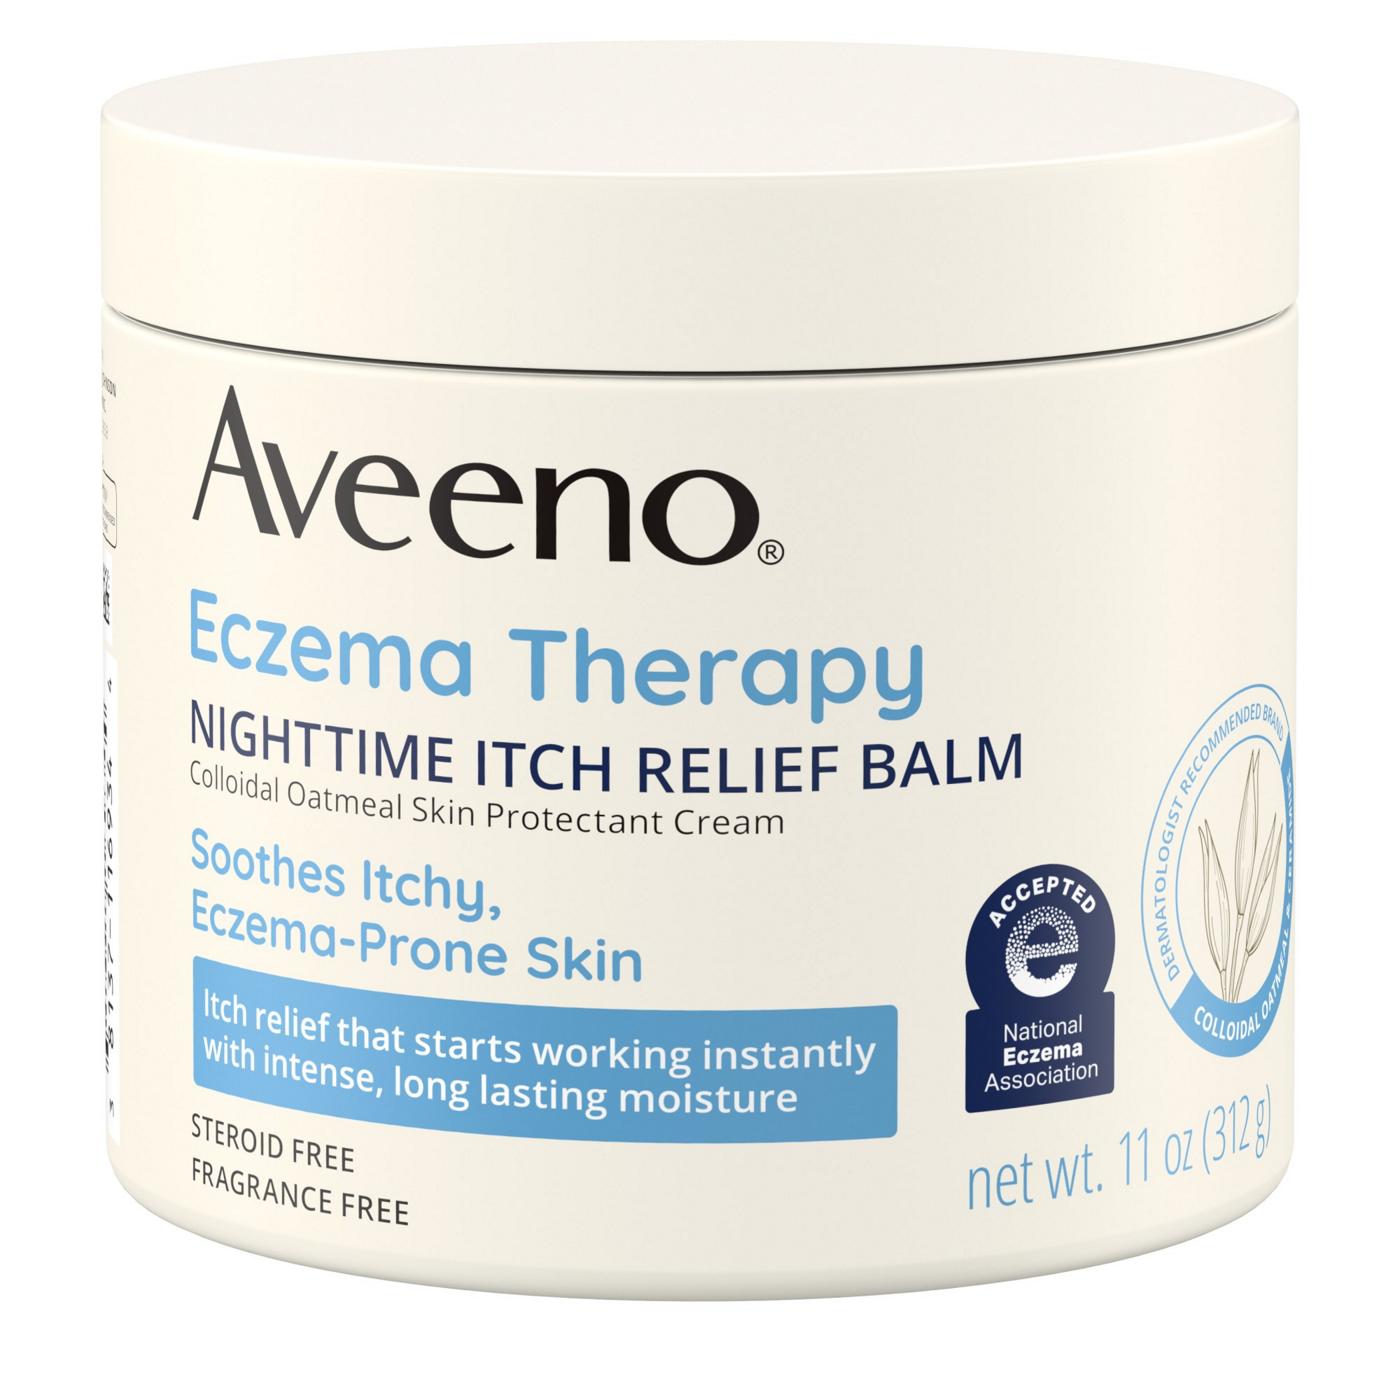 Aveeno Eczema Therapy Nighttime Itch Relief Balm; image 1 of 3